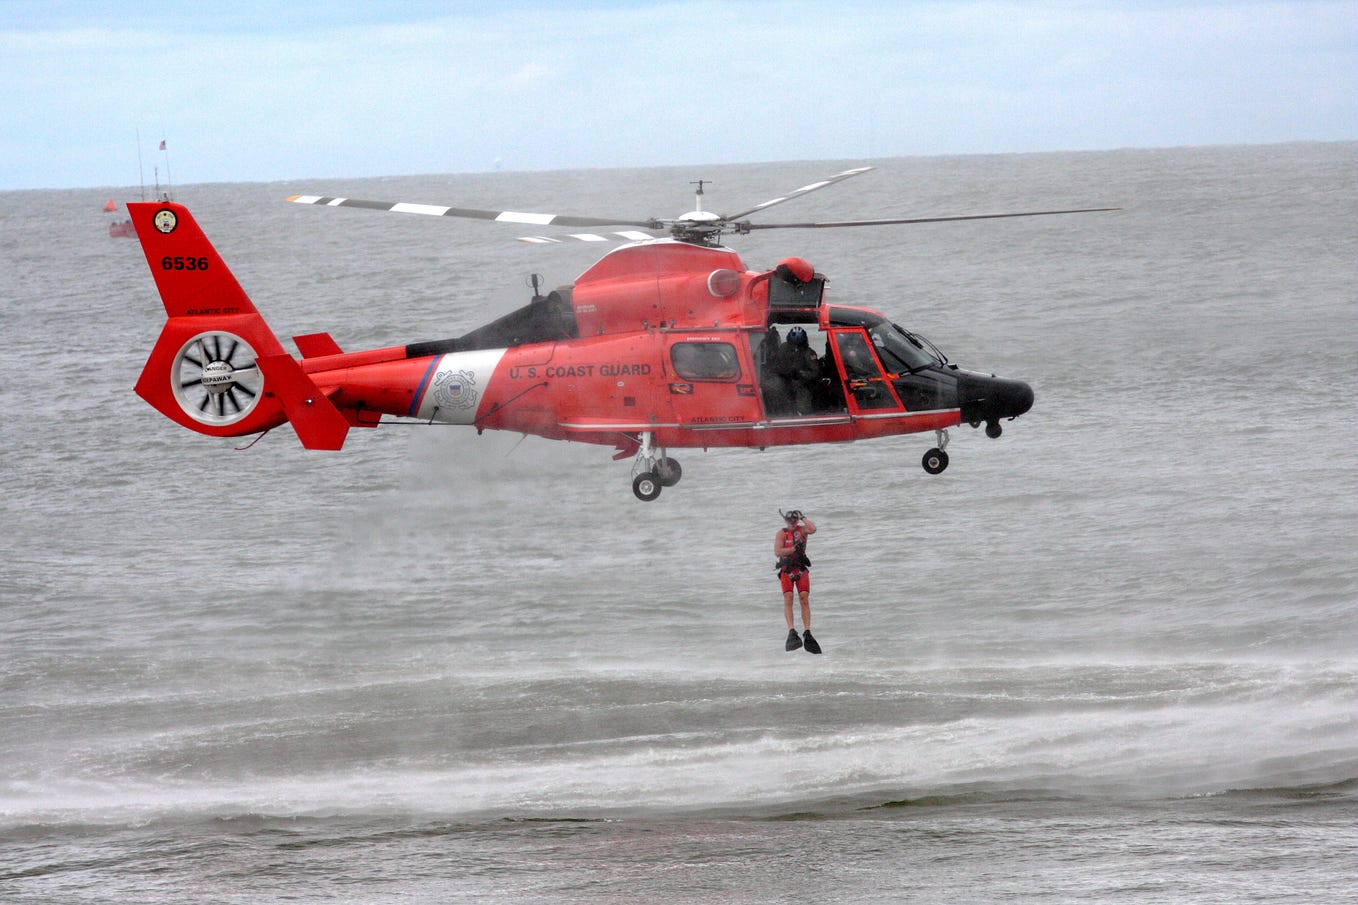 This woman was the first to complete Coast Guard Rescue Swimmer training, and serve